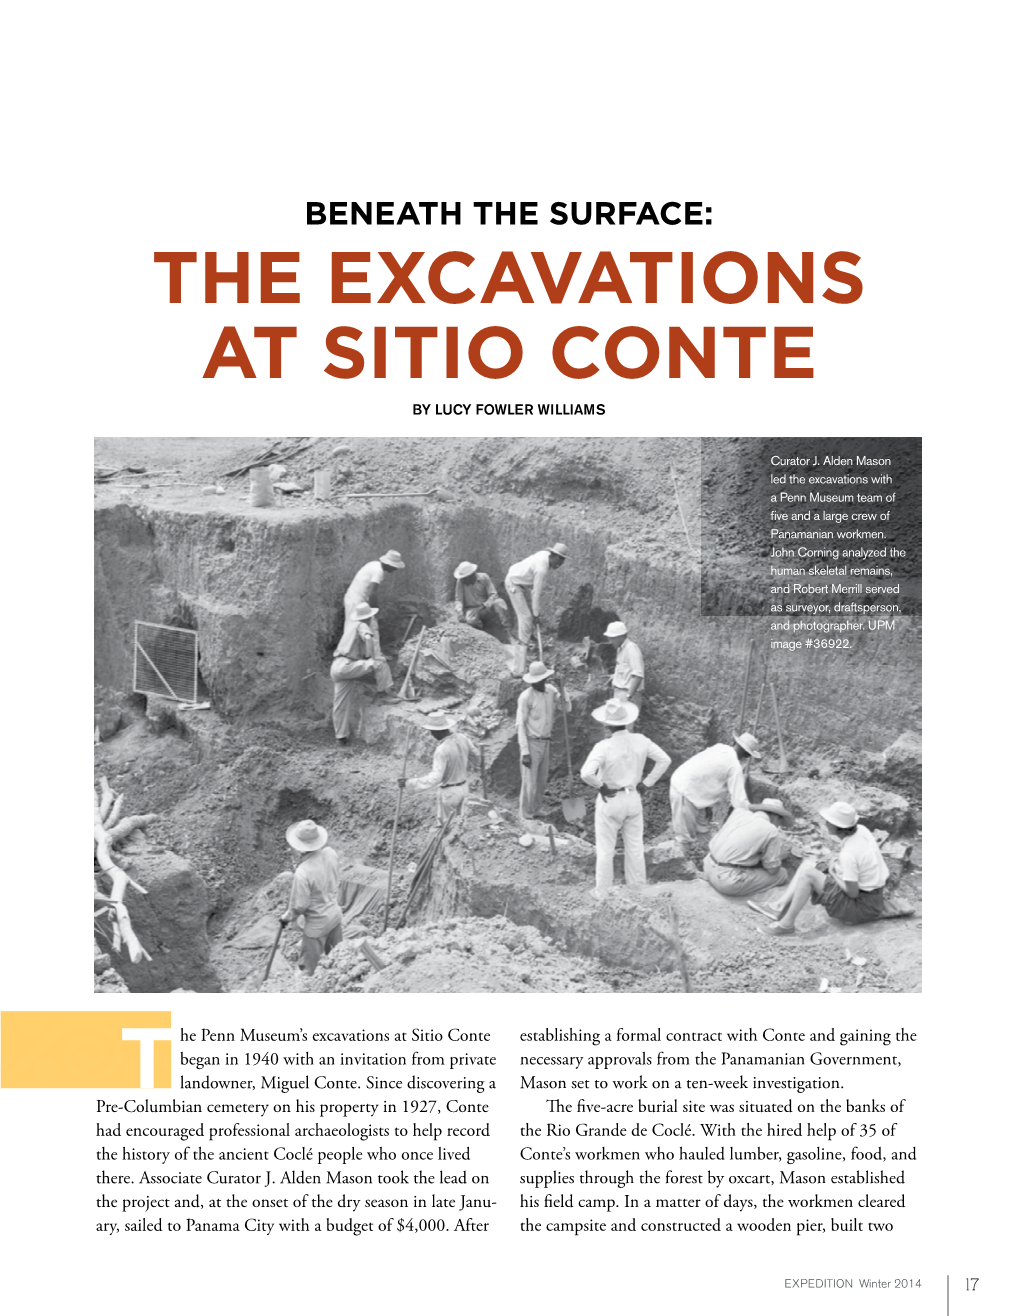 The Excavations at Sitio Conte by Lucy Fowler Williams